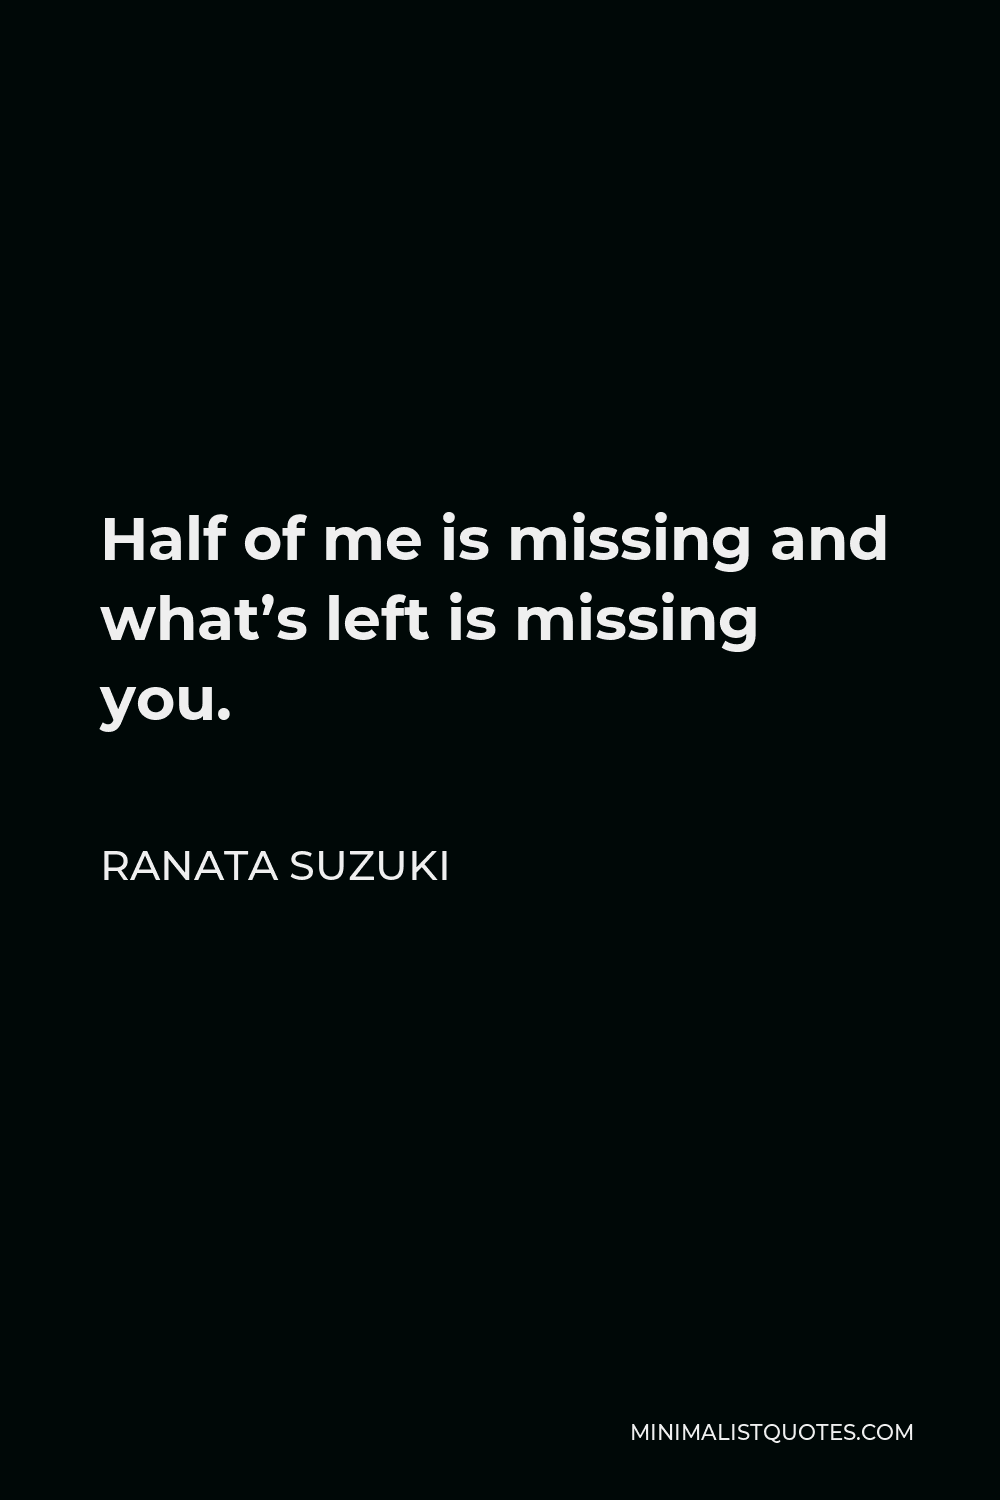 Ranata Suzuki Quote - Half of me is missing and what’s left is missing you.